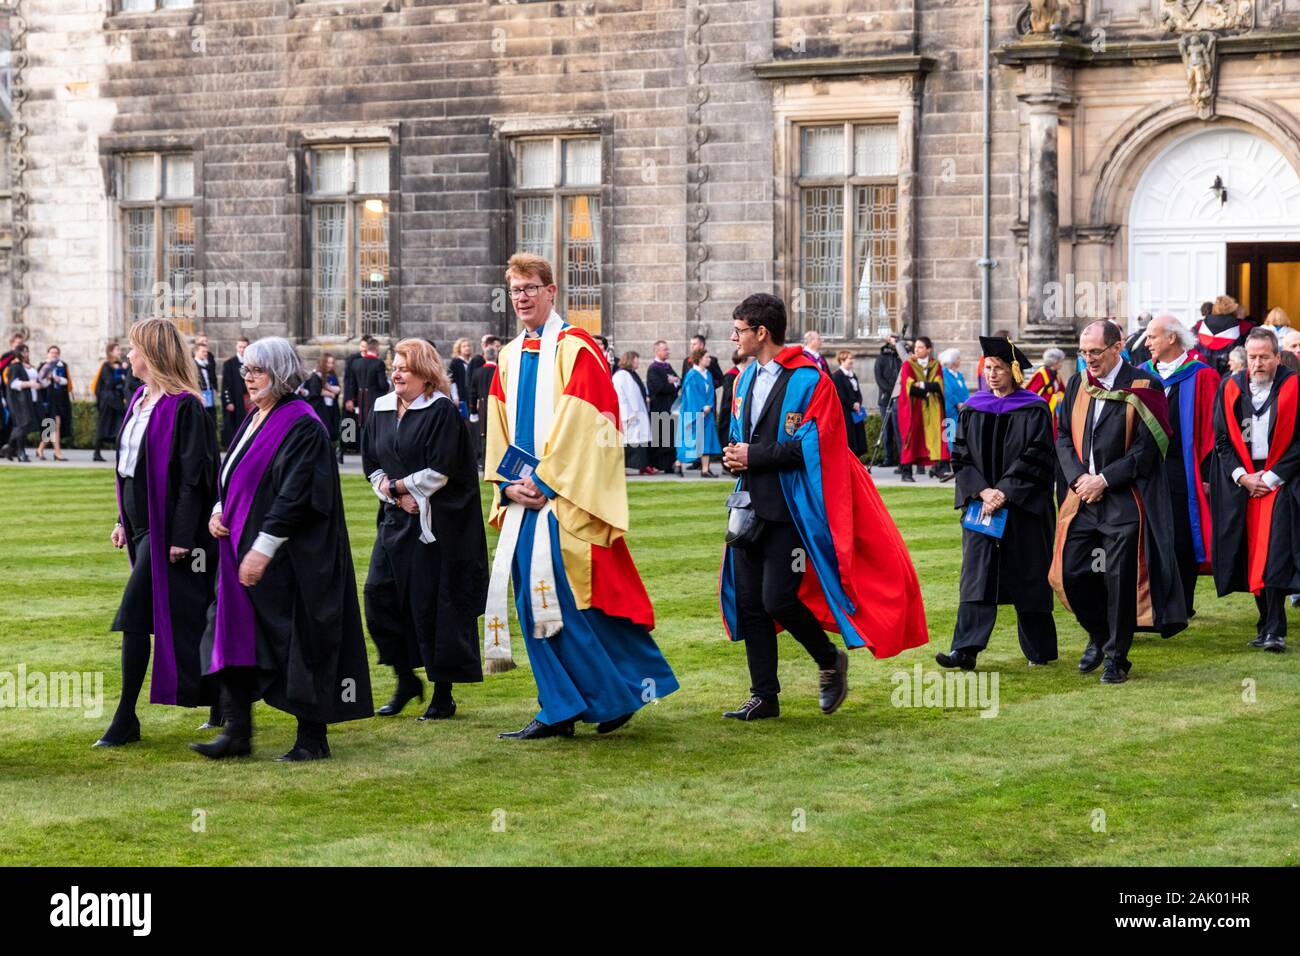 Procession after the December 2019 graduation ceremony of St Andrews University taking place in the St Salvators quadrangle (Sallies Quad), St Andrews Stock Photo